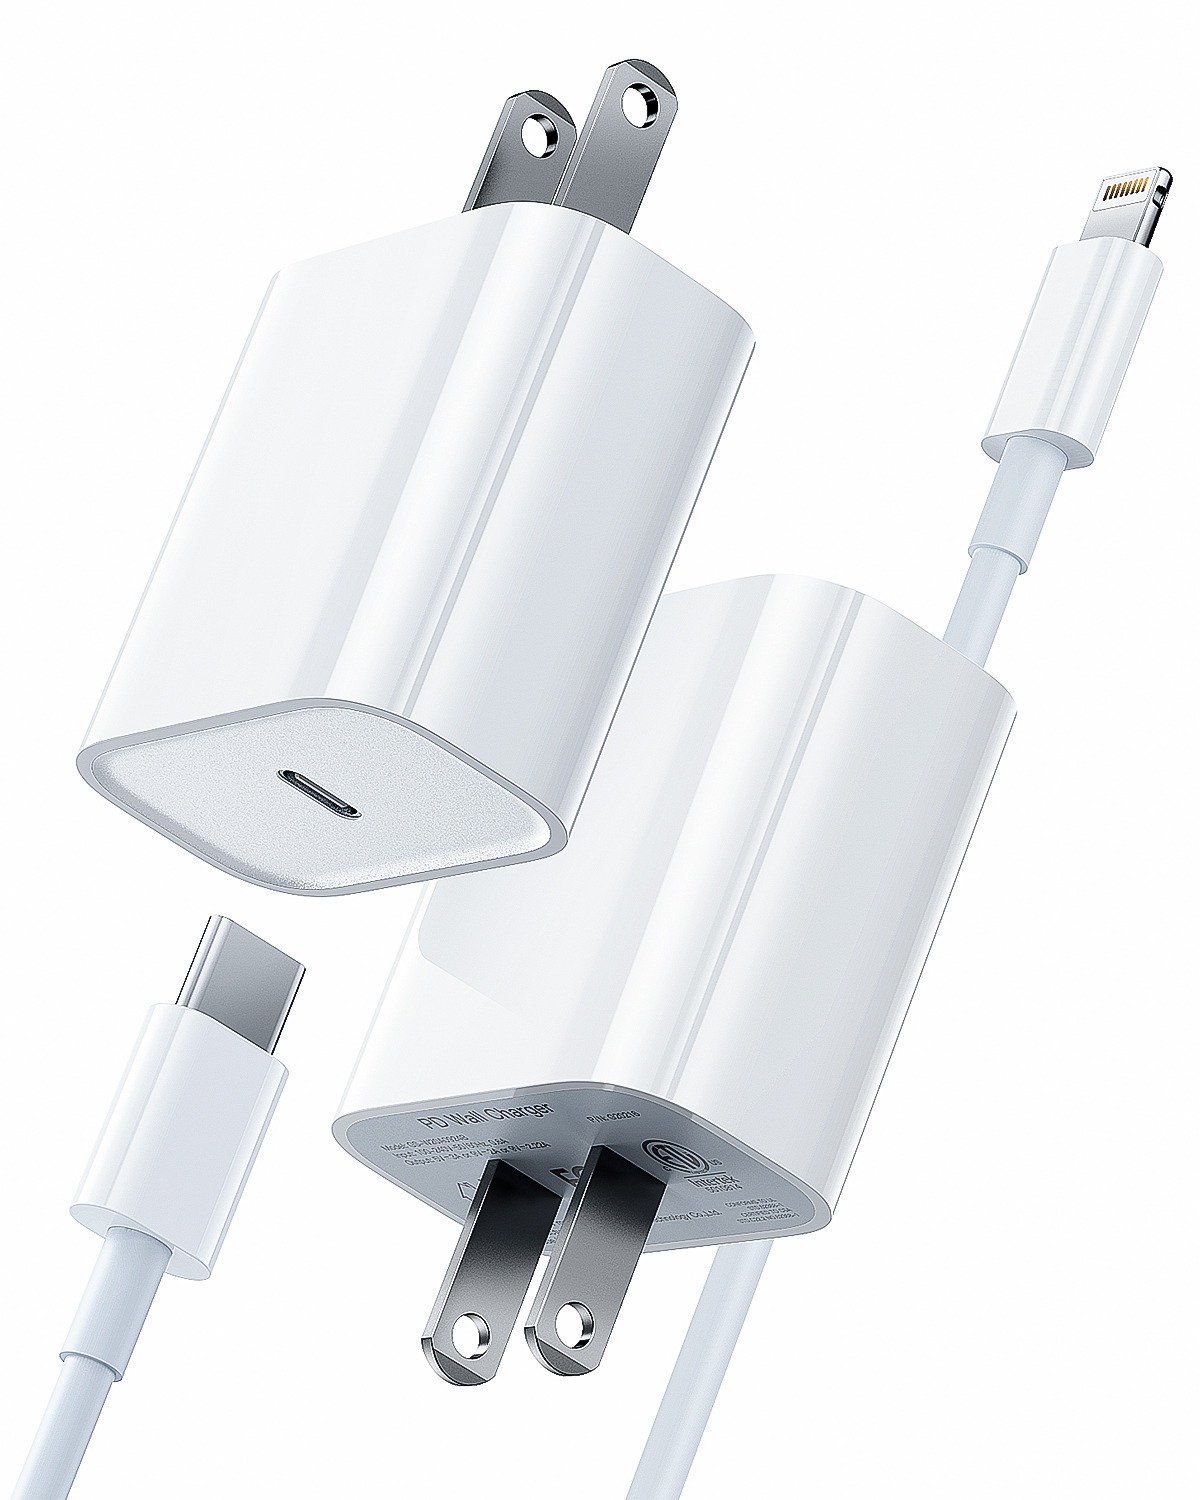 Gusgu Tech 20W iPhone Wall Charger w/ 6Ft Type C to Lightning Cable $7.50 & More + Free Shipping